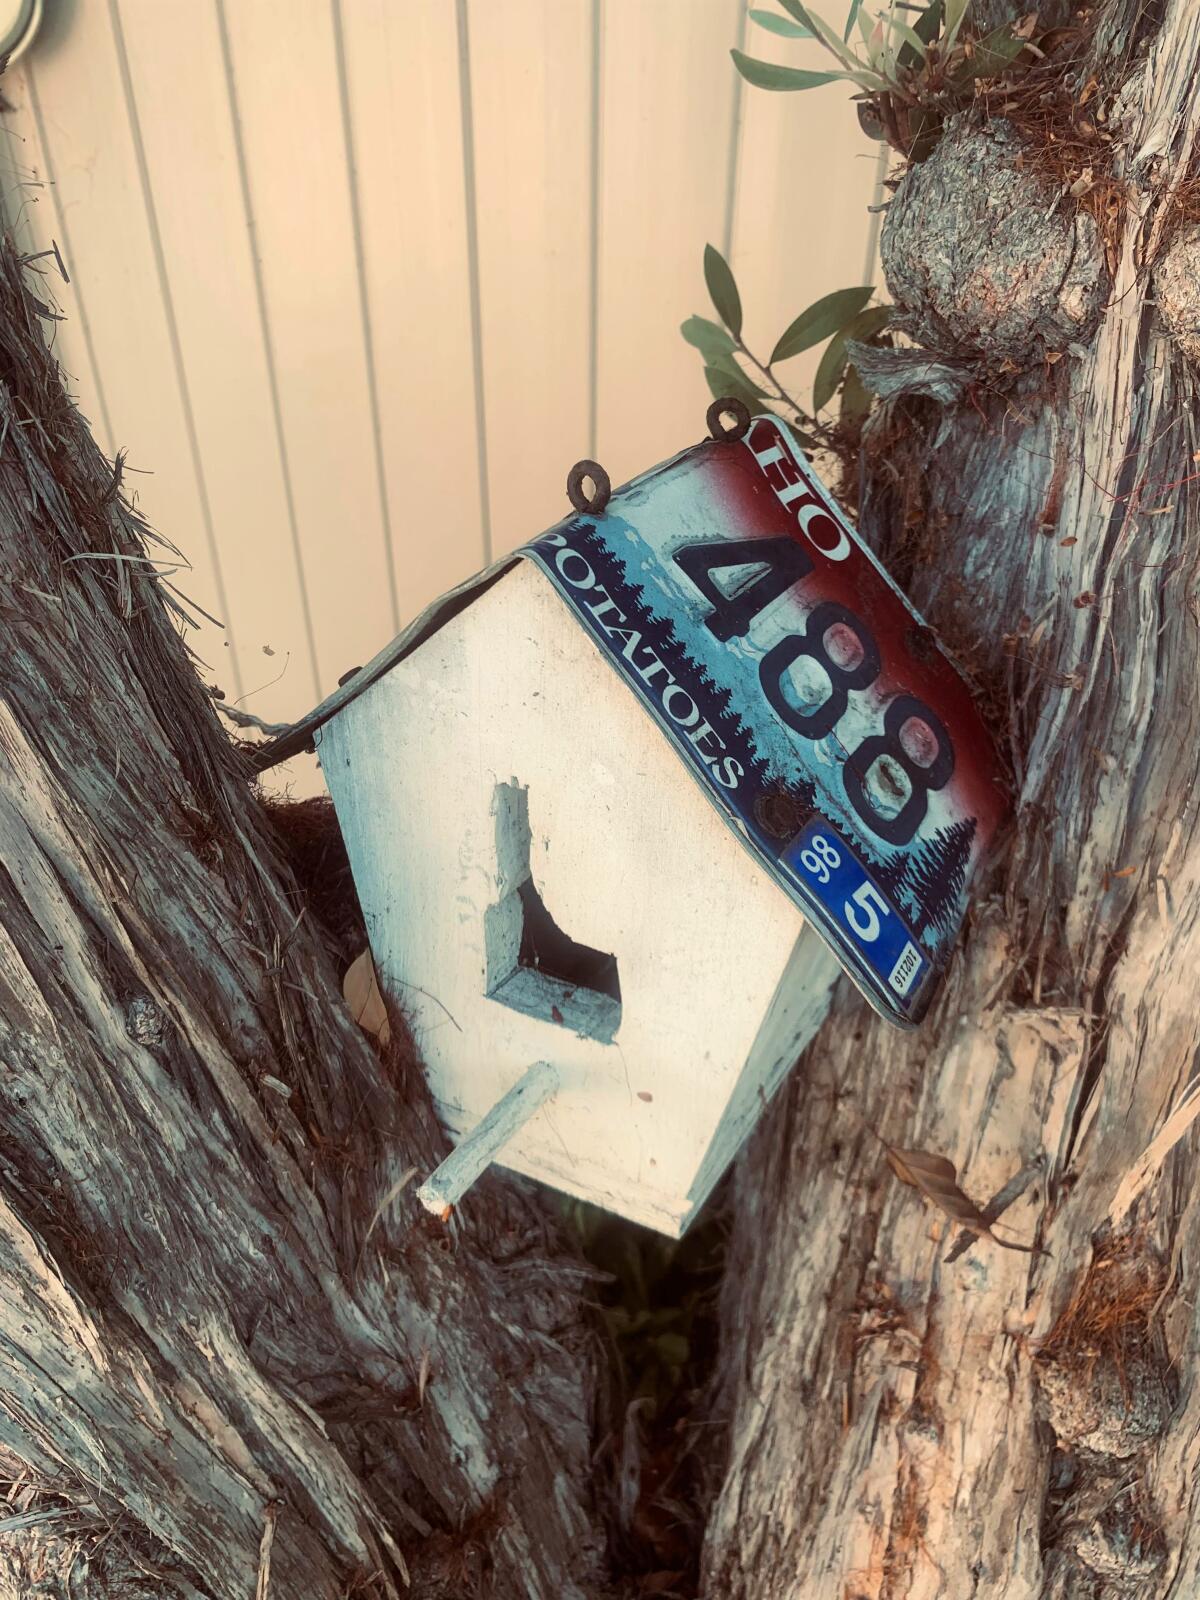 A birdhouse created in 1997 by Huntington Beach's Jason Stout inspired a passion for creating custom items 23 years later.